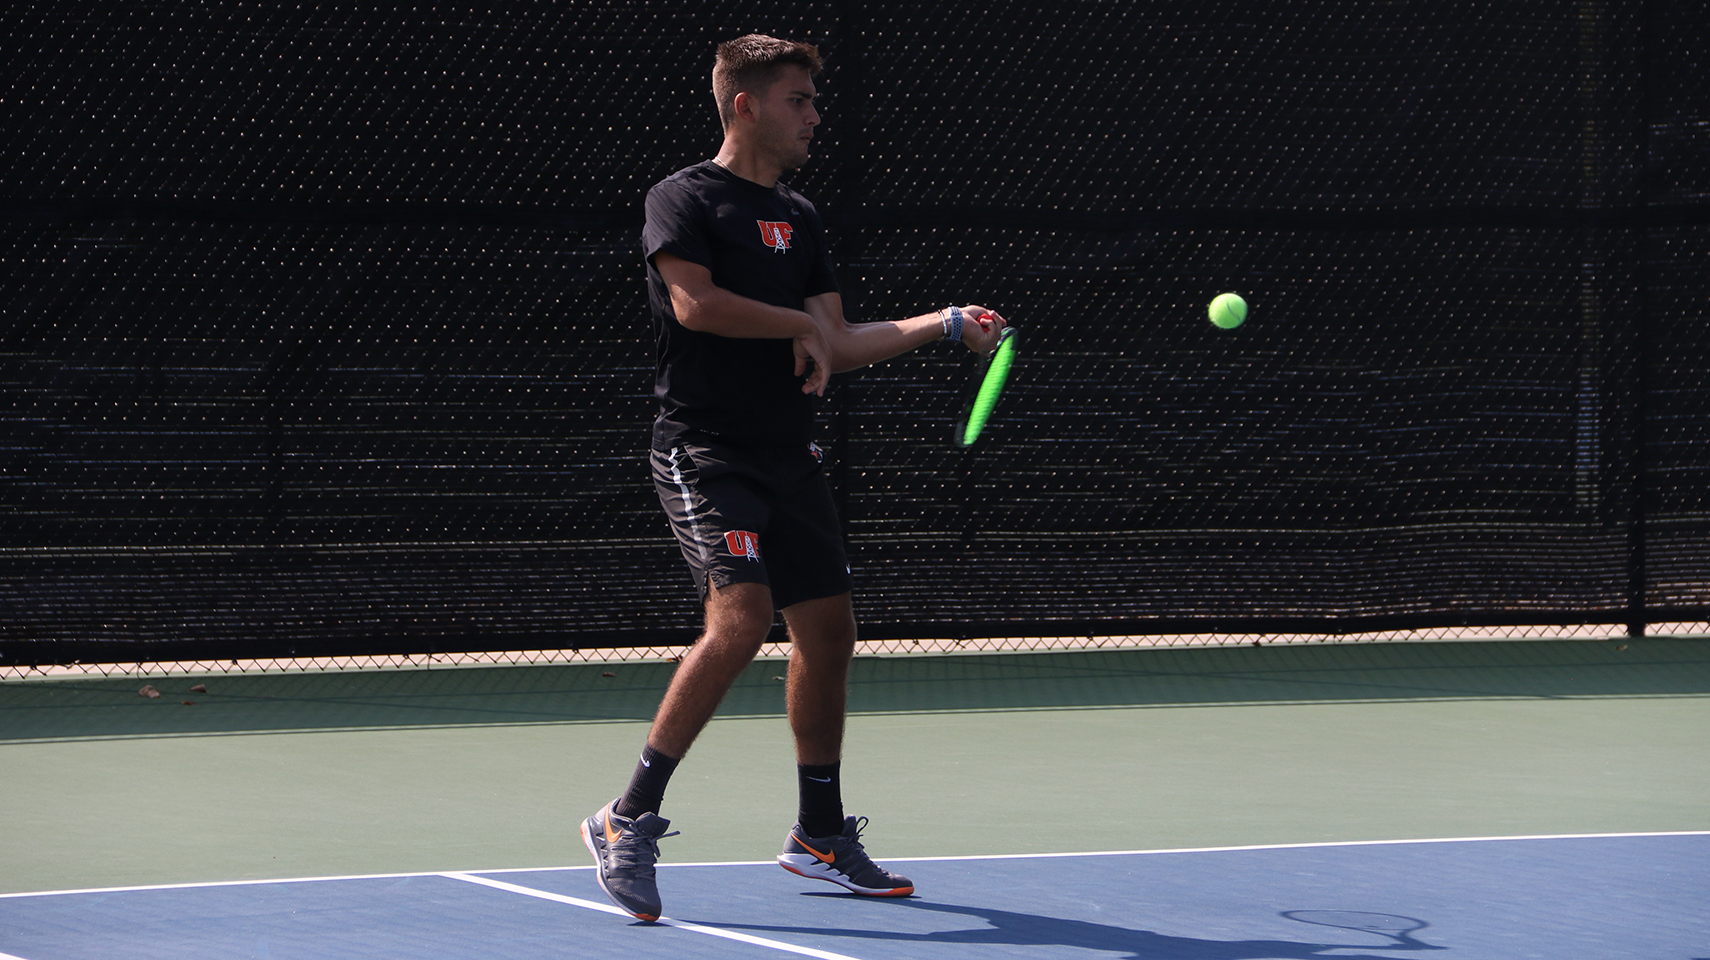 Men's tennis player hitting in a shadow on the court